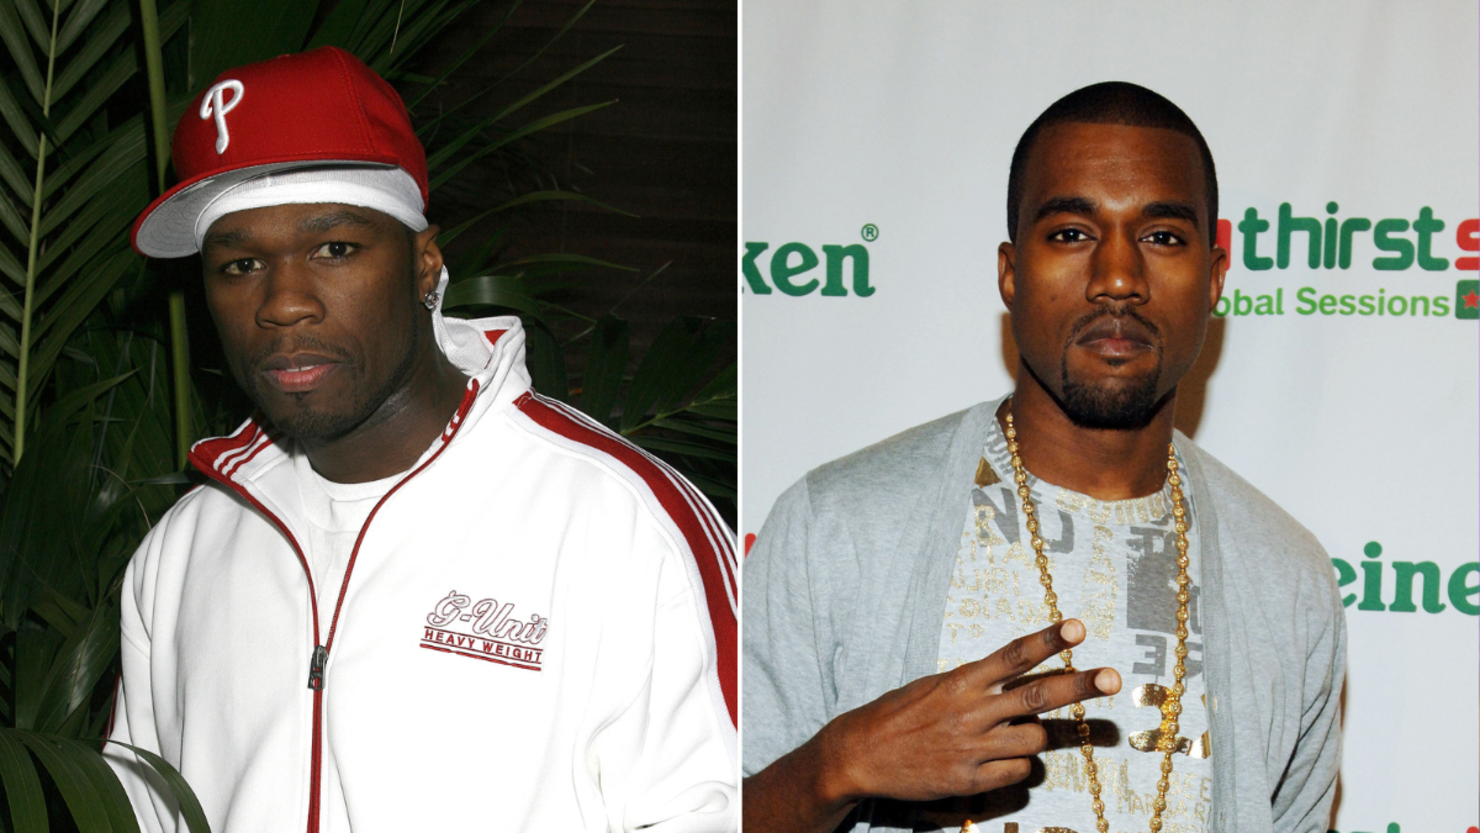 50 Cent and Kanye West